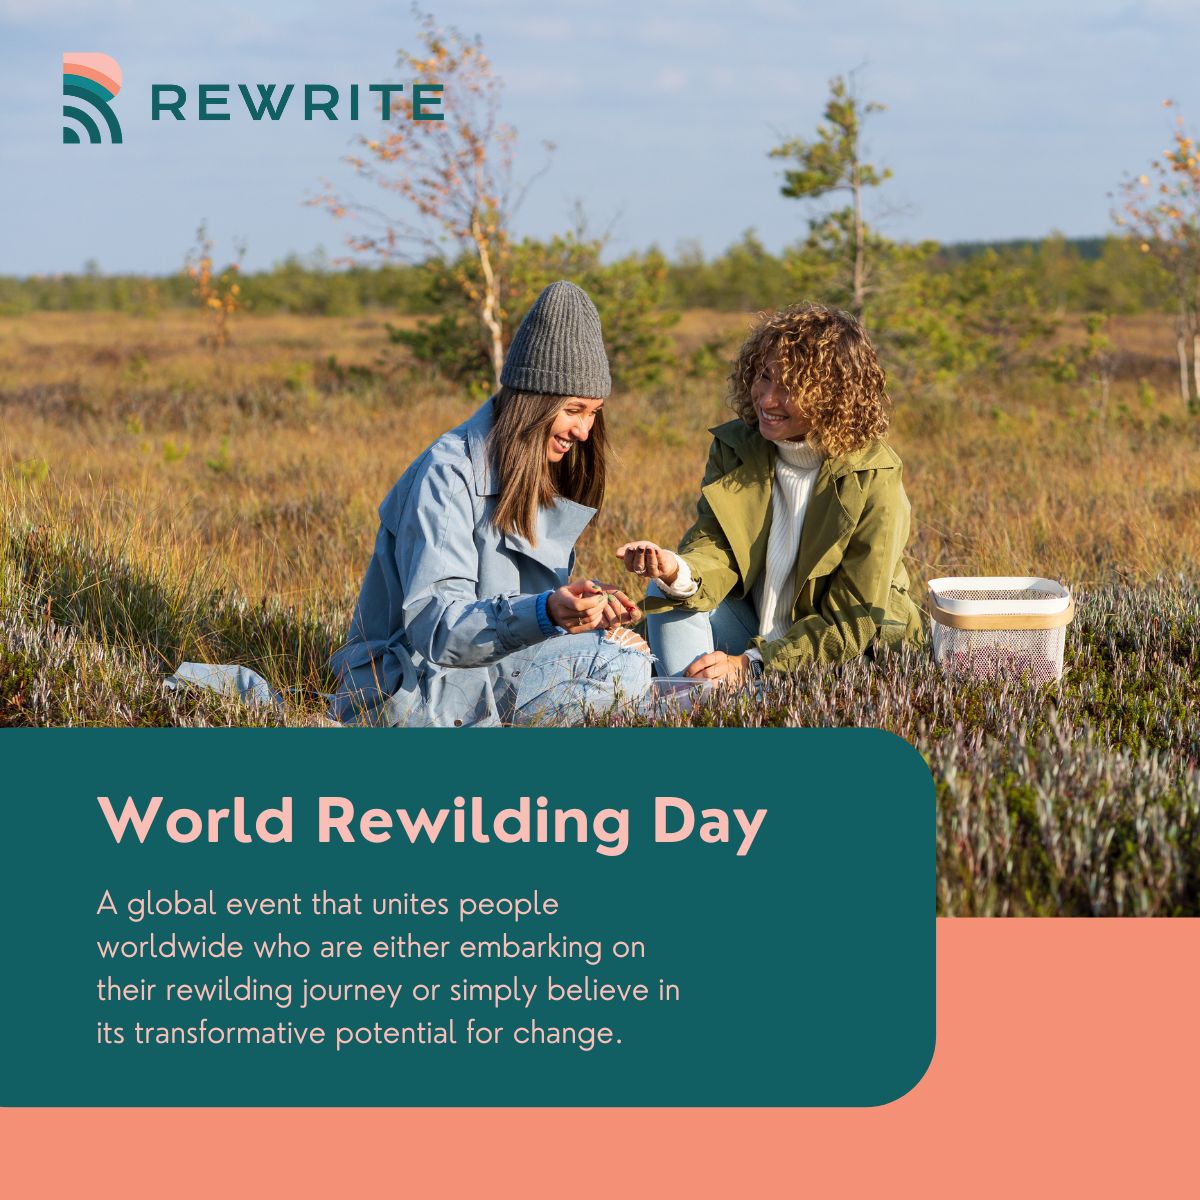 🌿 Embrace the power of #rewilding & join us in celebrating #RewildingDay.

Discover how projects like REWRITE are leading the charge in restoring 🇪🇺's coastal ecosystems and bringing hope to our planet.

Read more in our latest blog: bit.ly/3vnbOoP
#HopeIntoAction 🌊